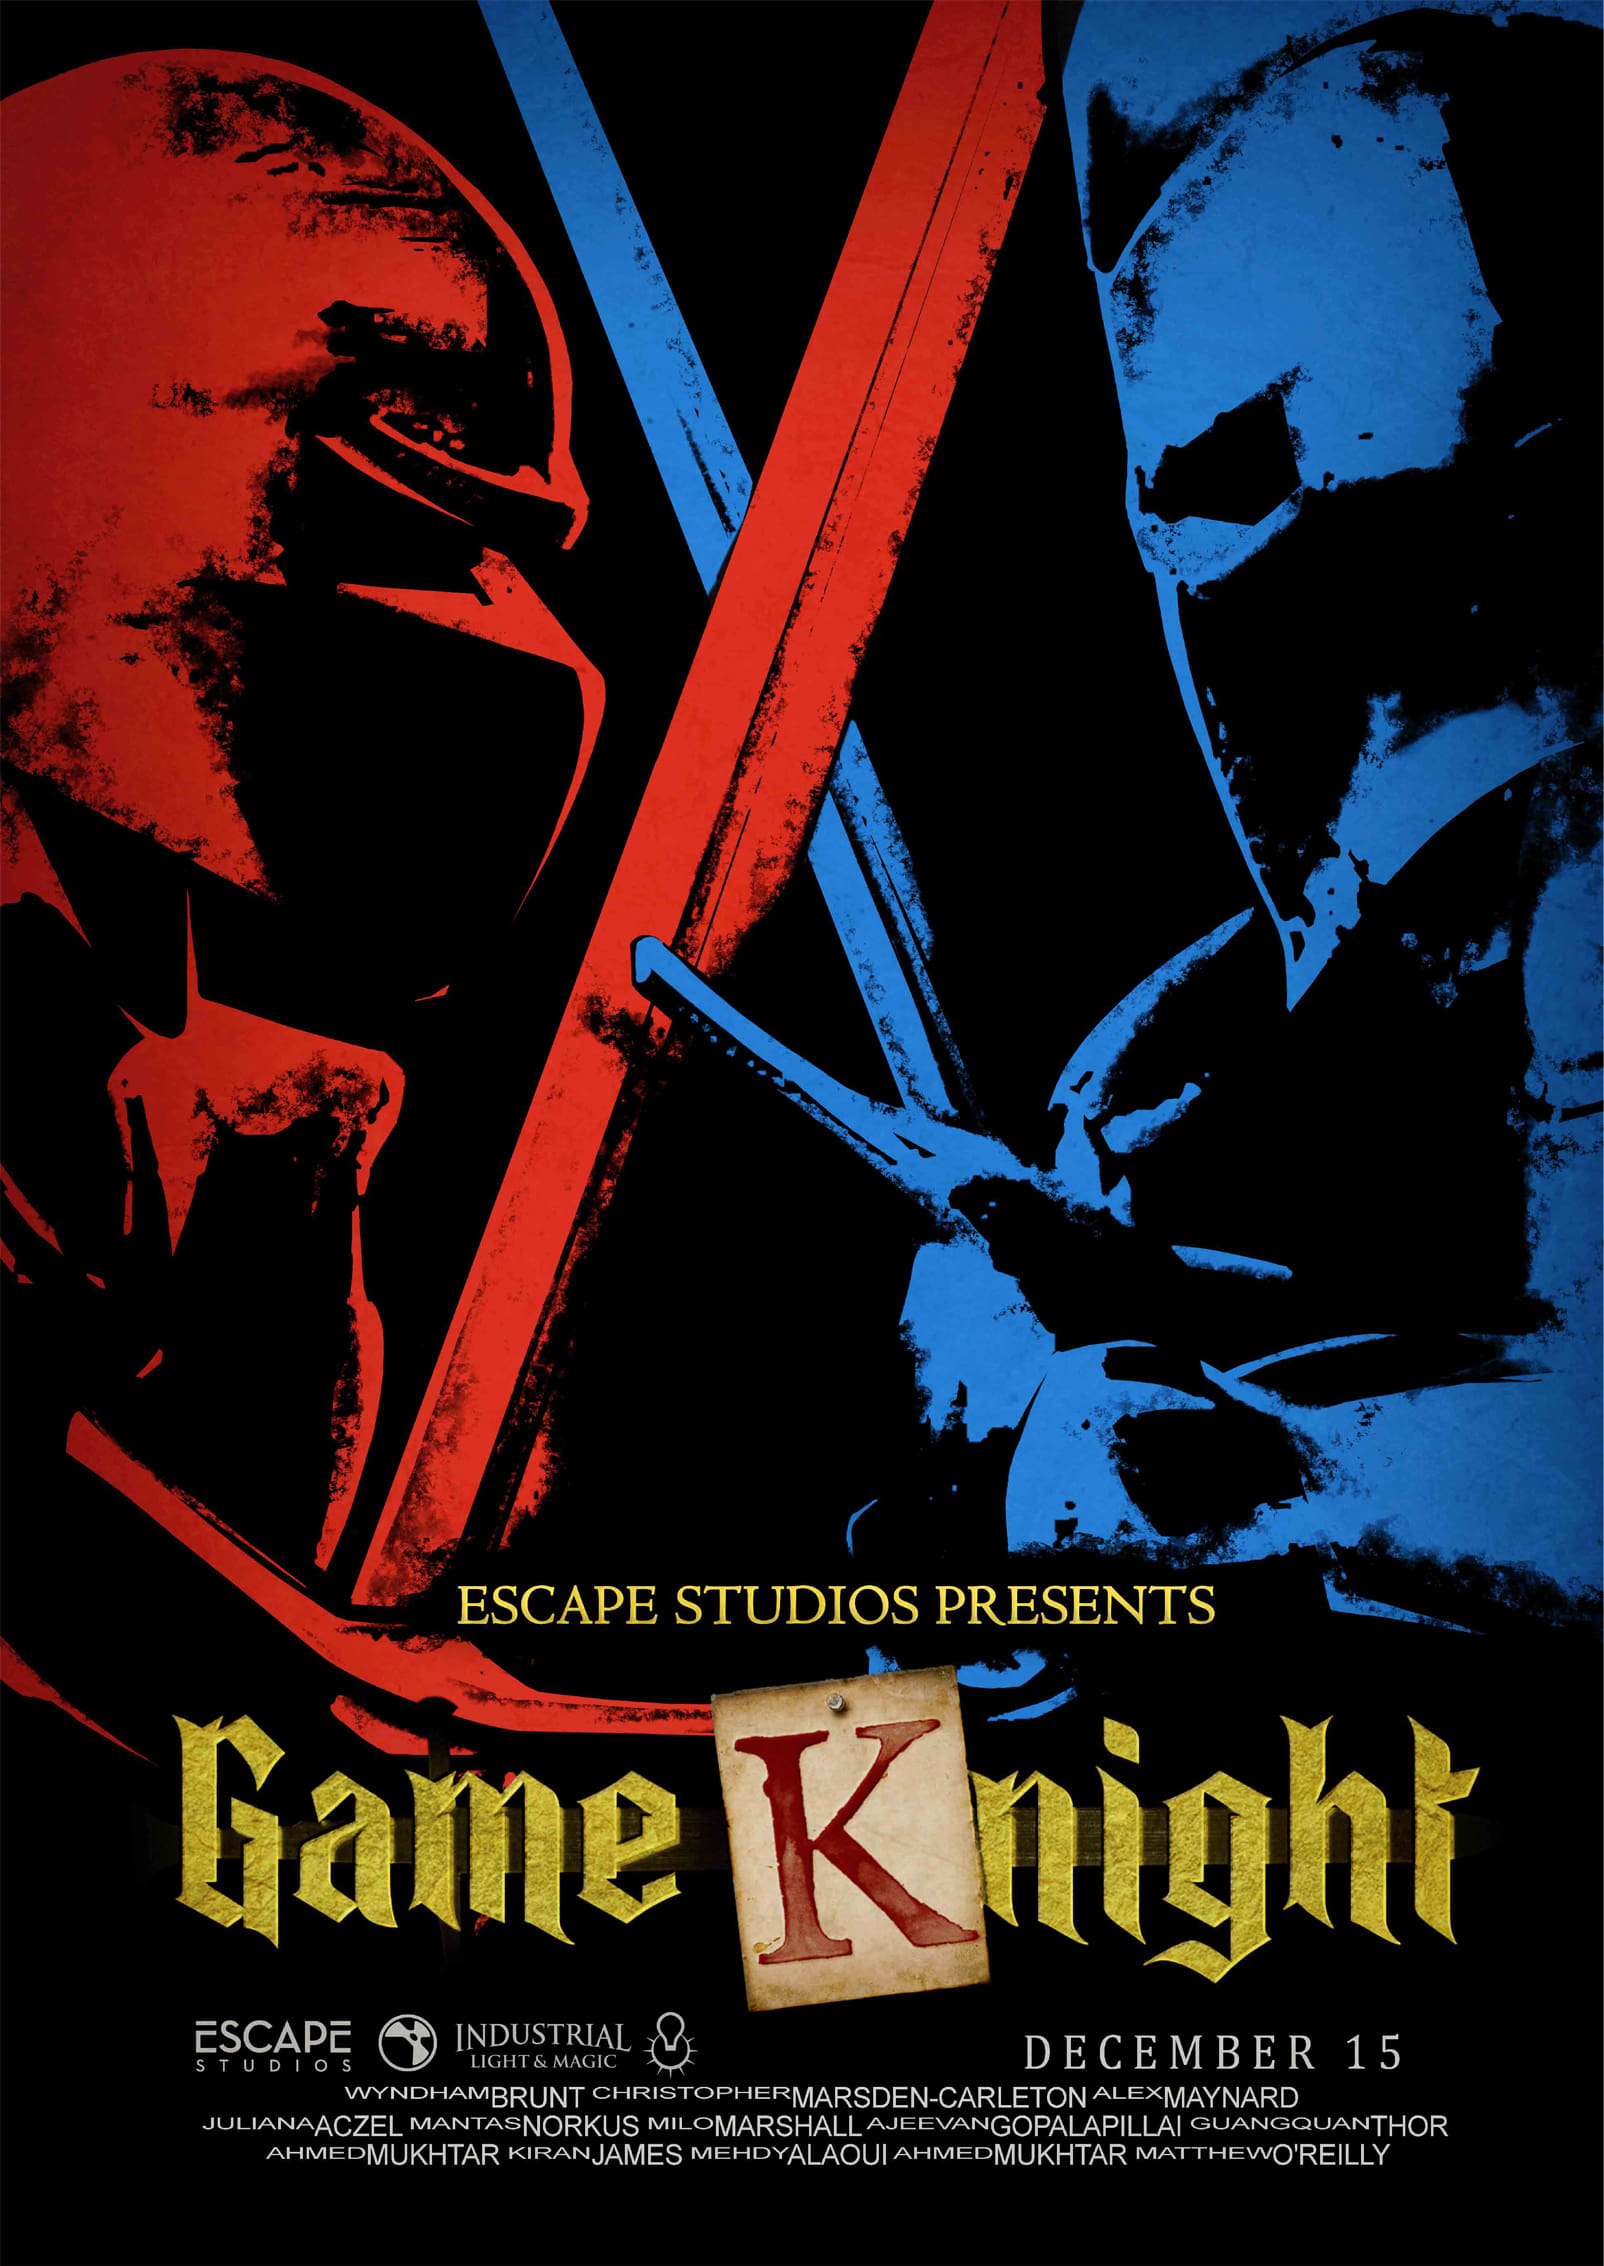 Game Knight